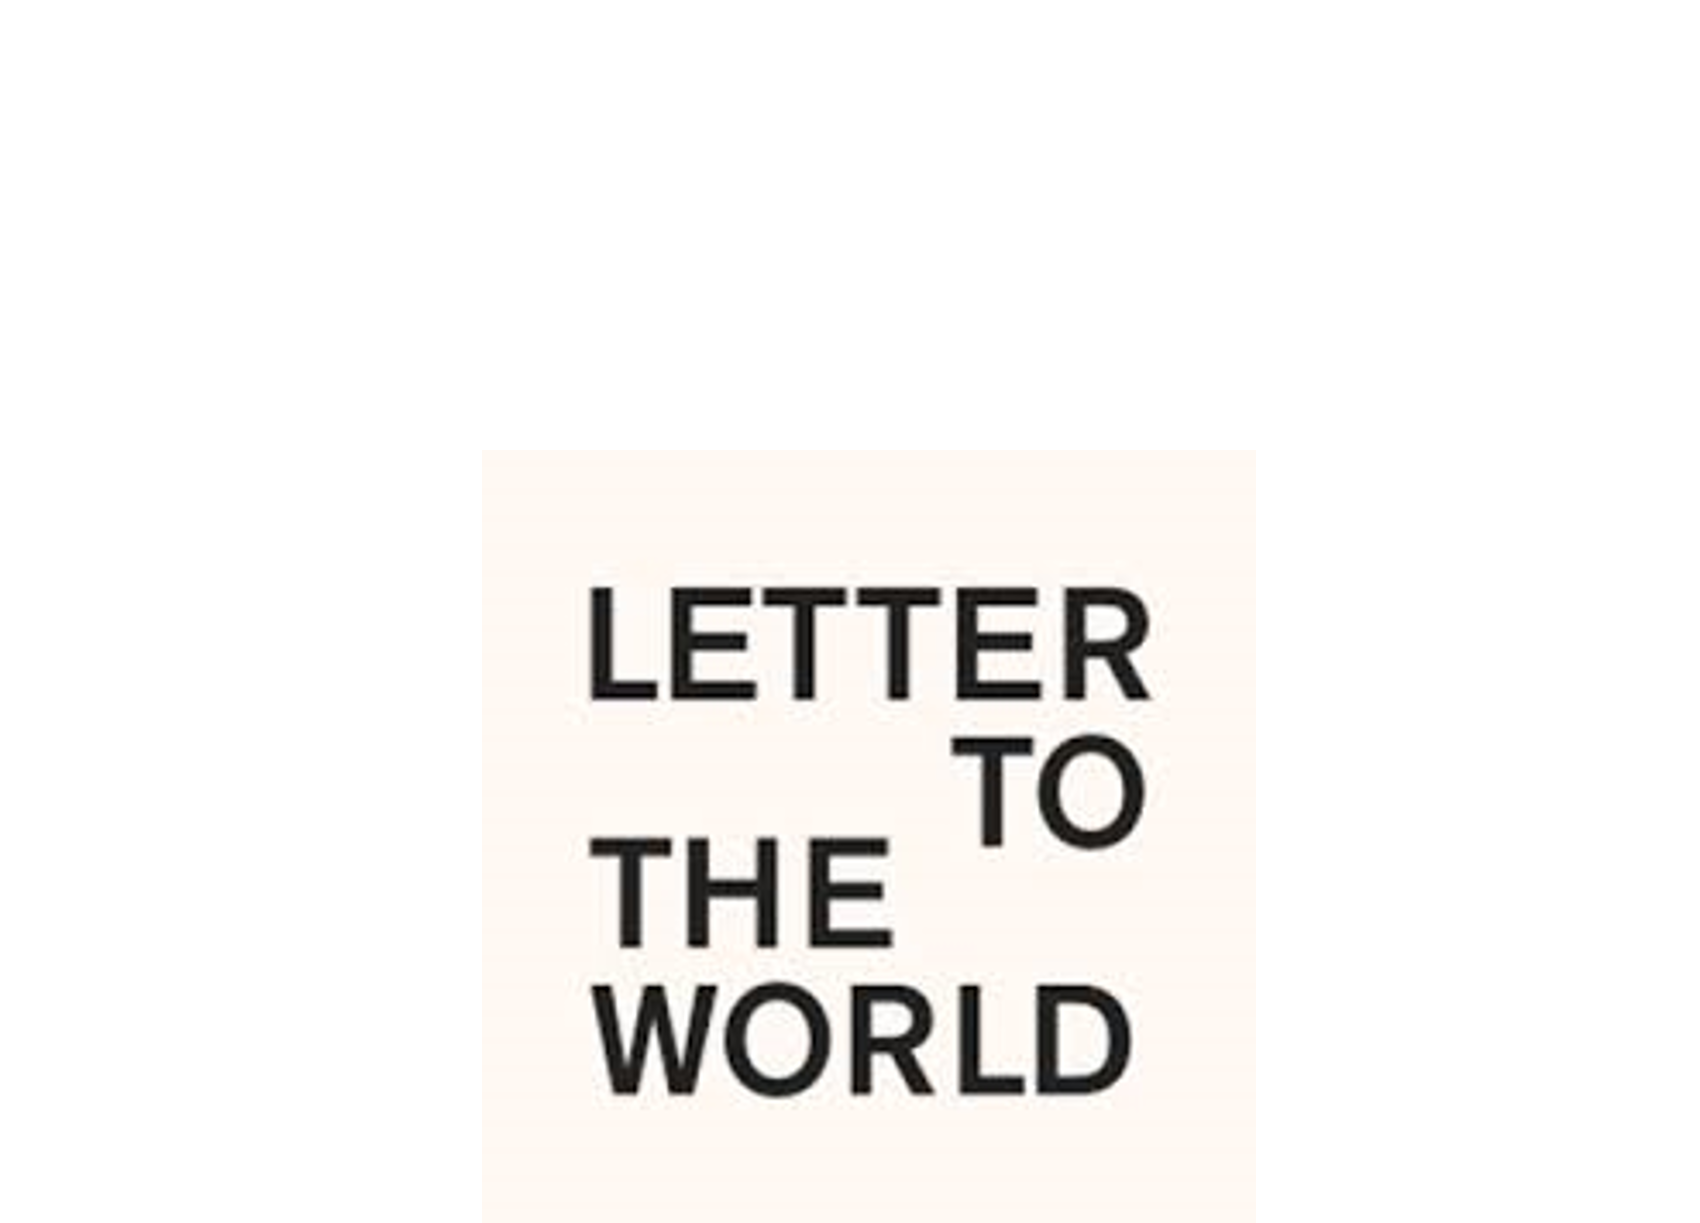 A Letter To The World